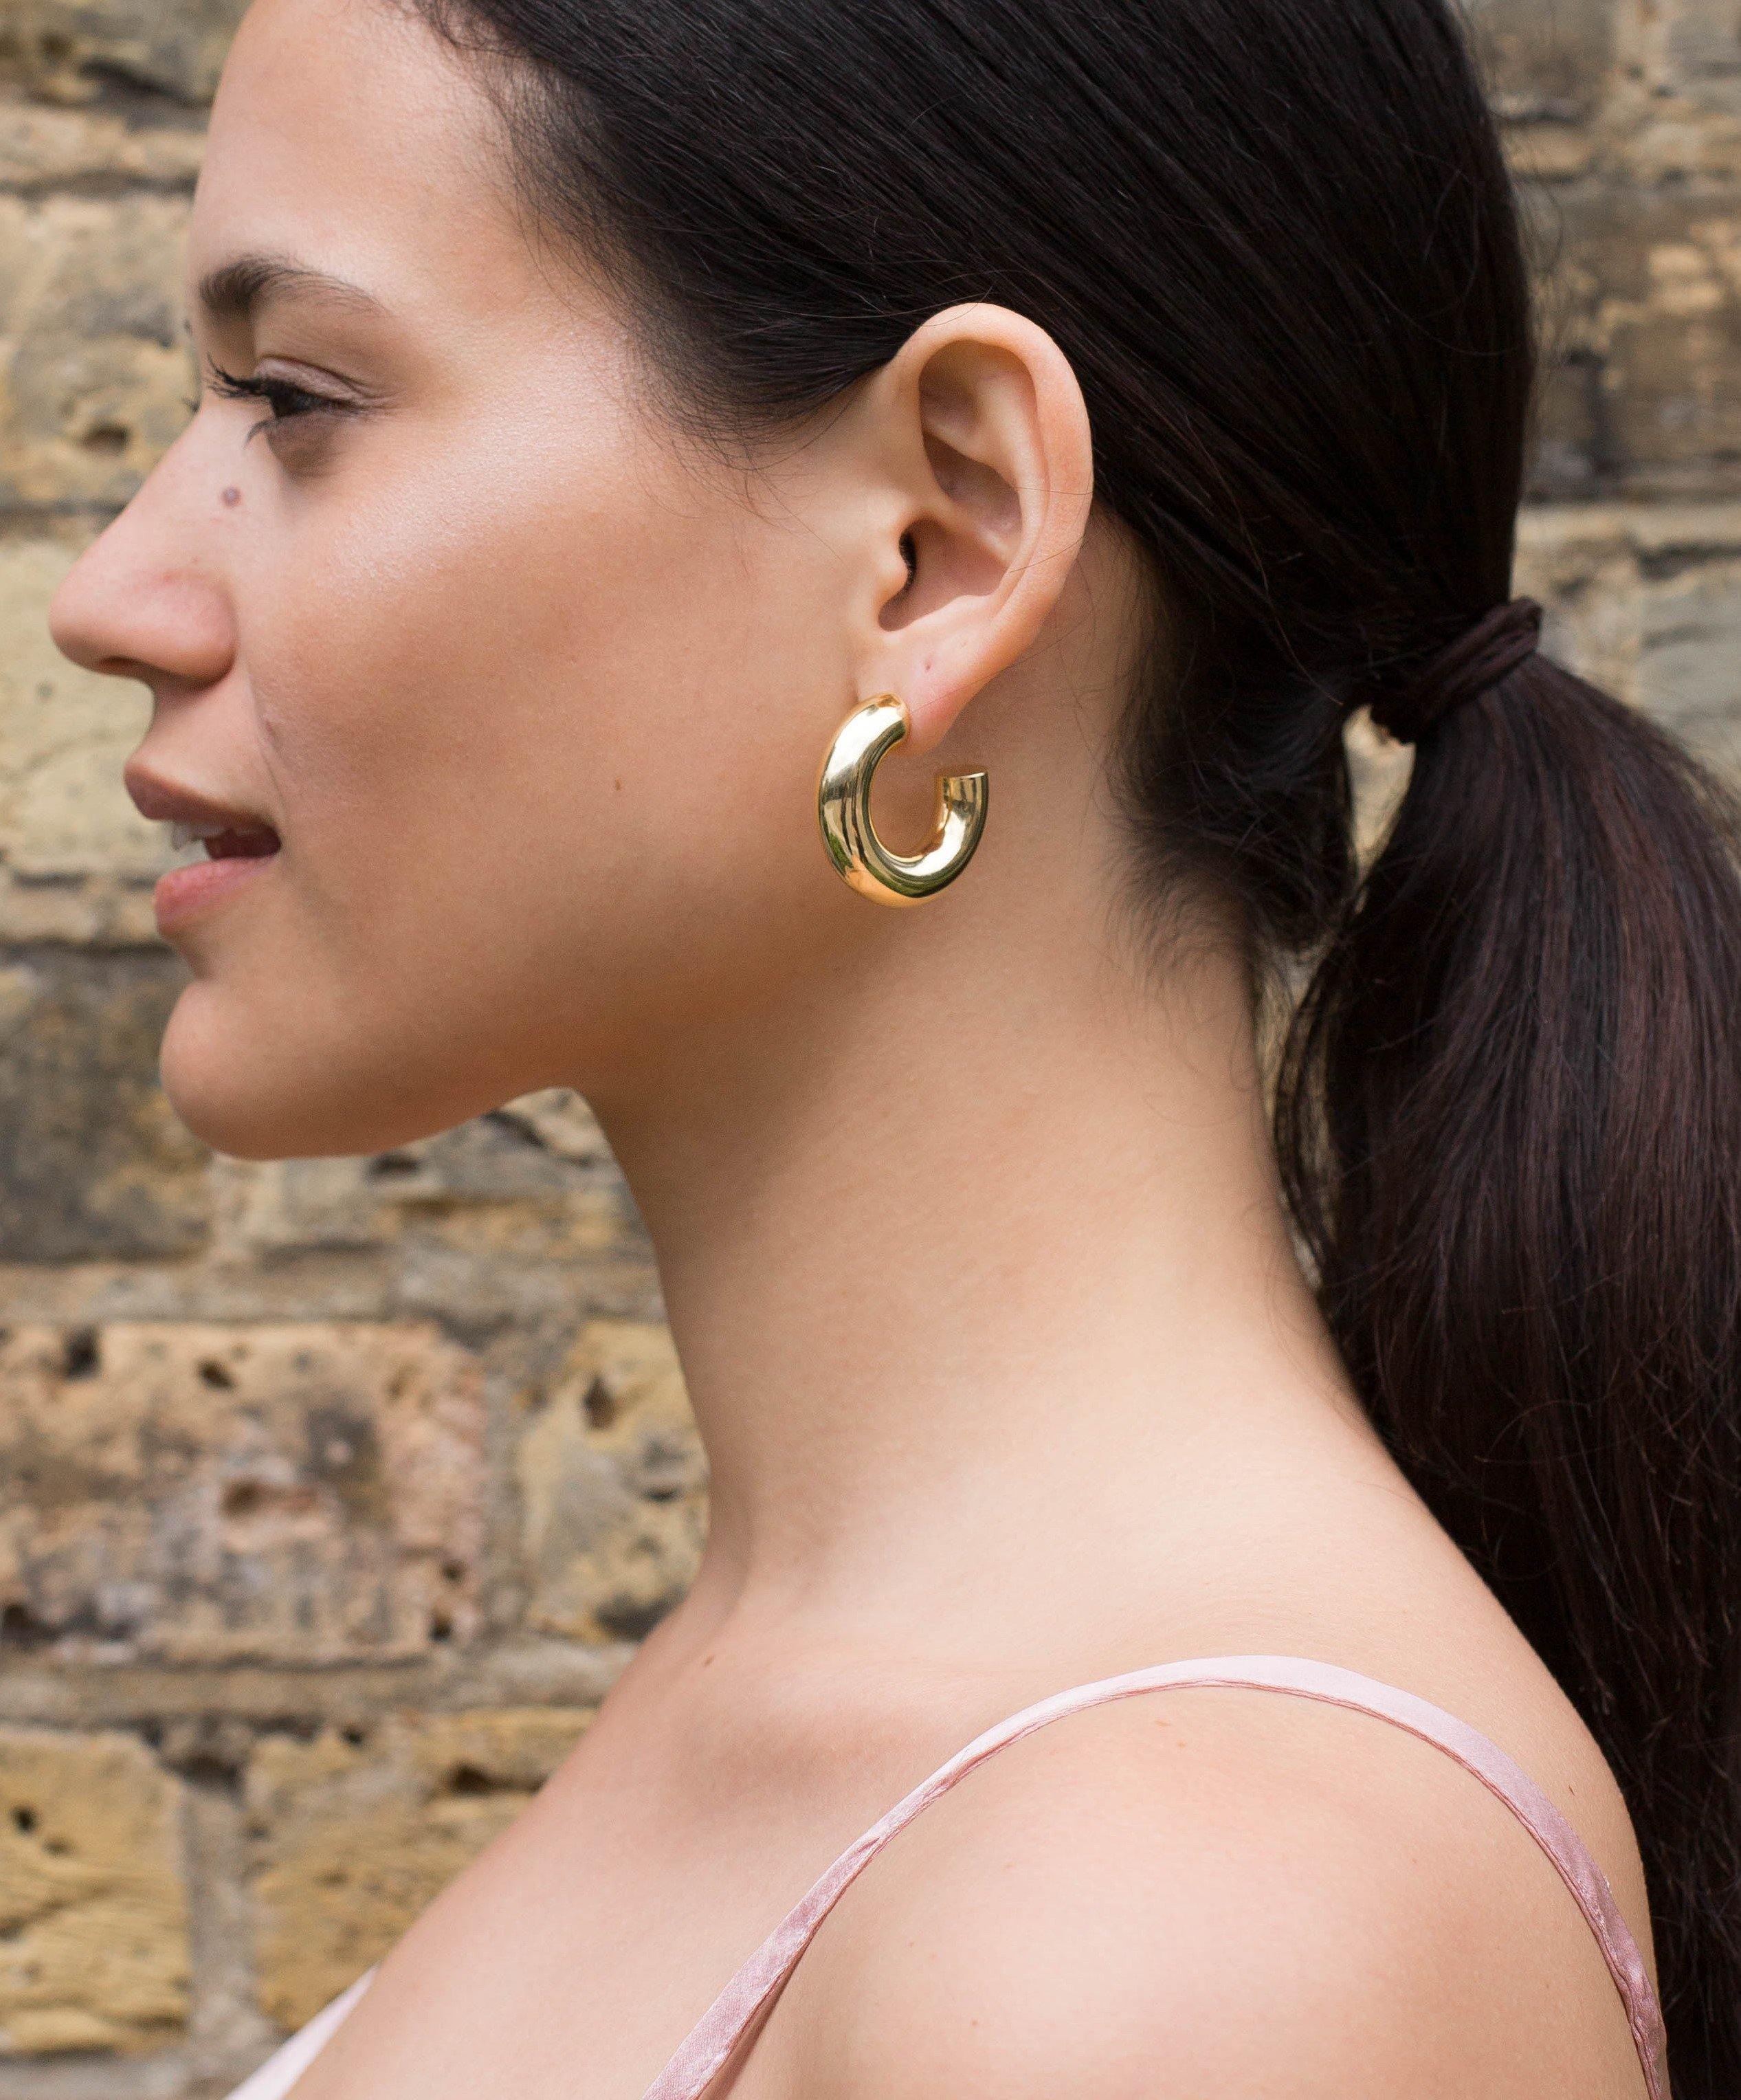 Curves in all the right places - THE HOOP STATION by Georgiana Scott Jewellery